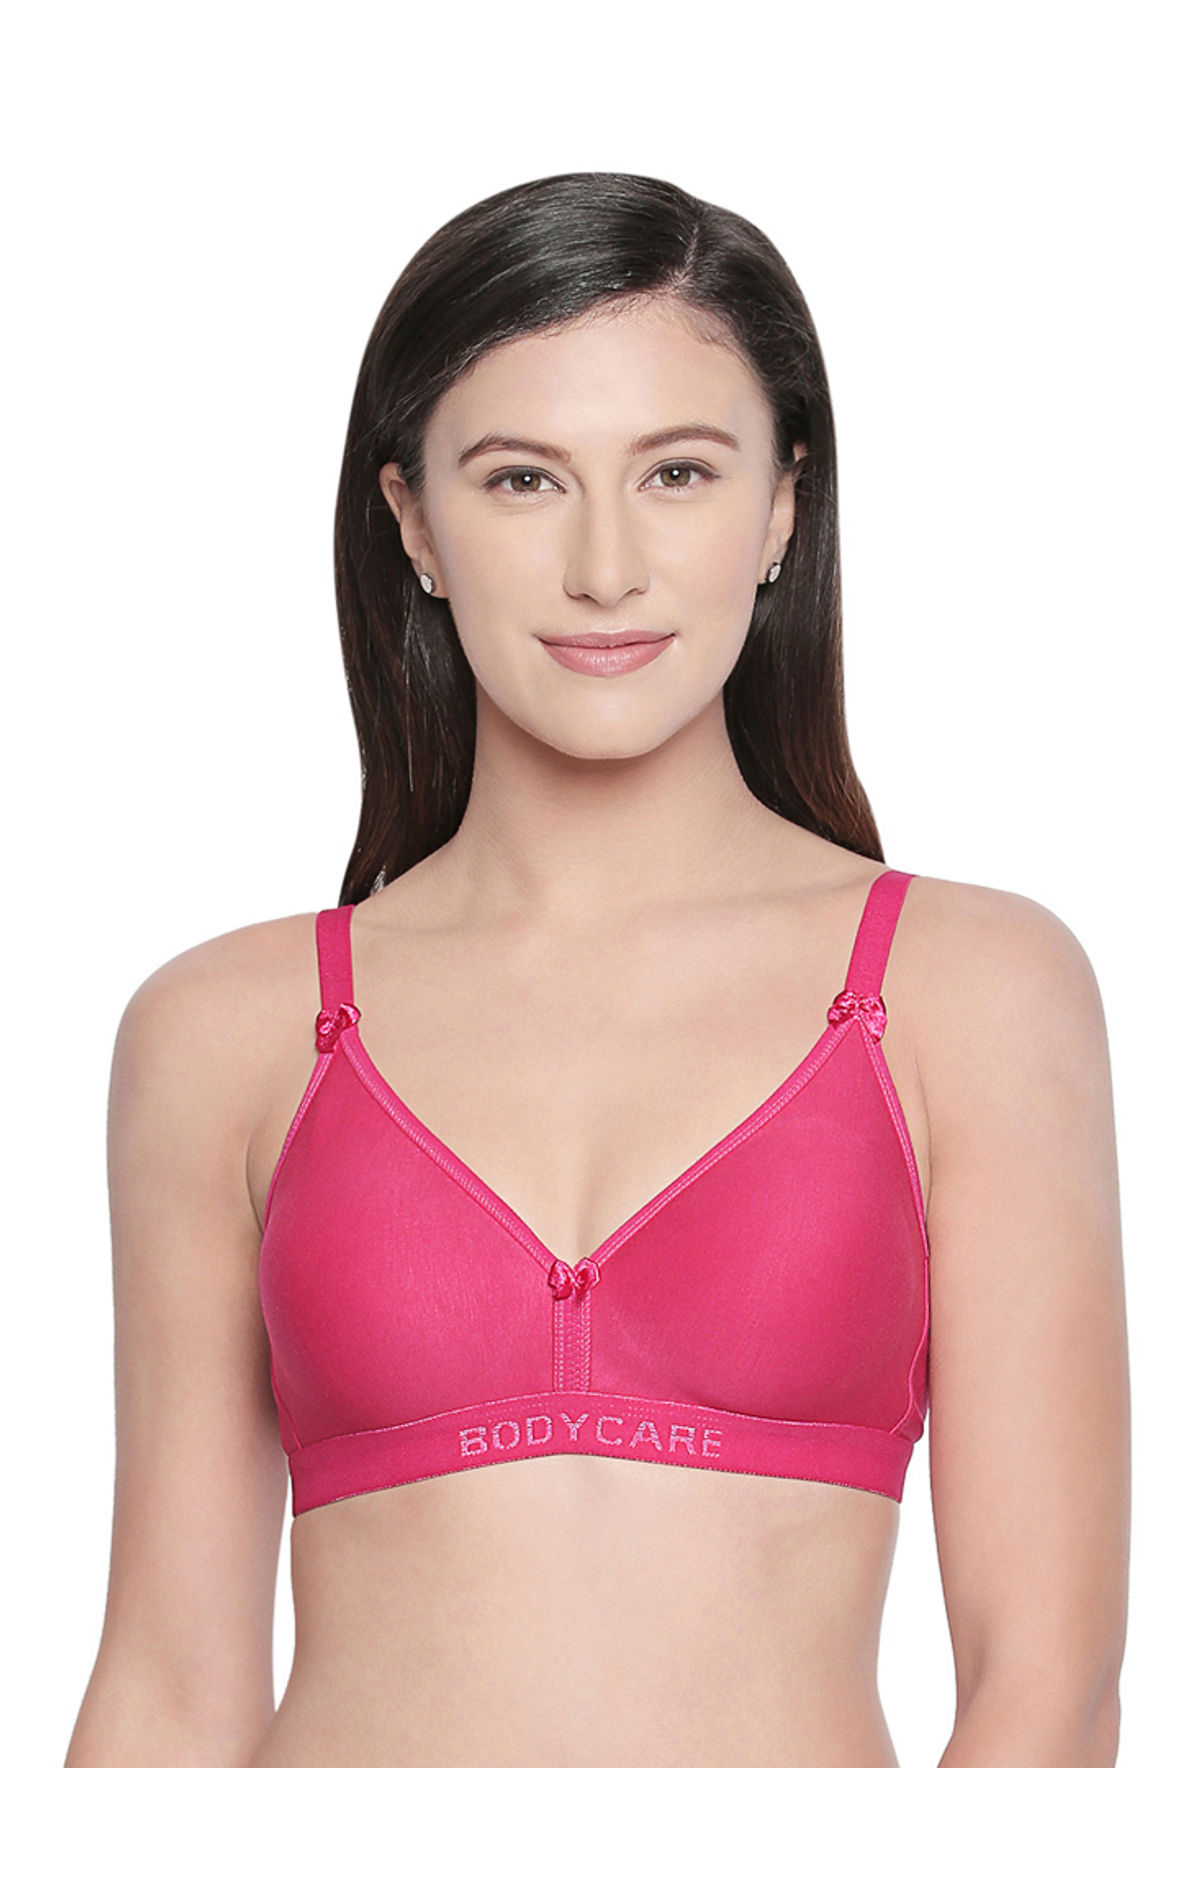 BODYCARE C-D Cup Bra 5586 in Guwahati at best price by Queens Palace -  Justdial